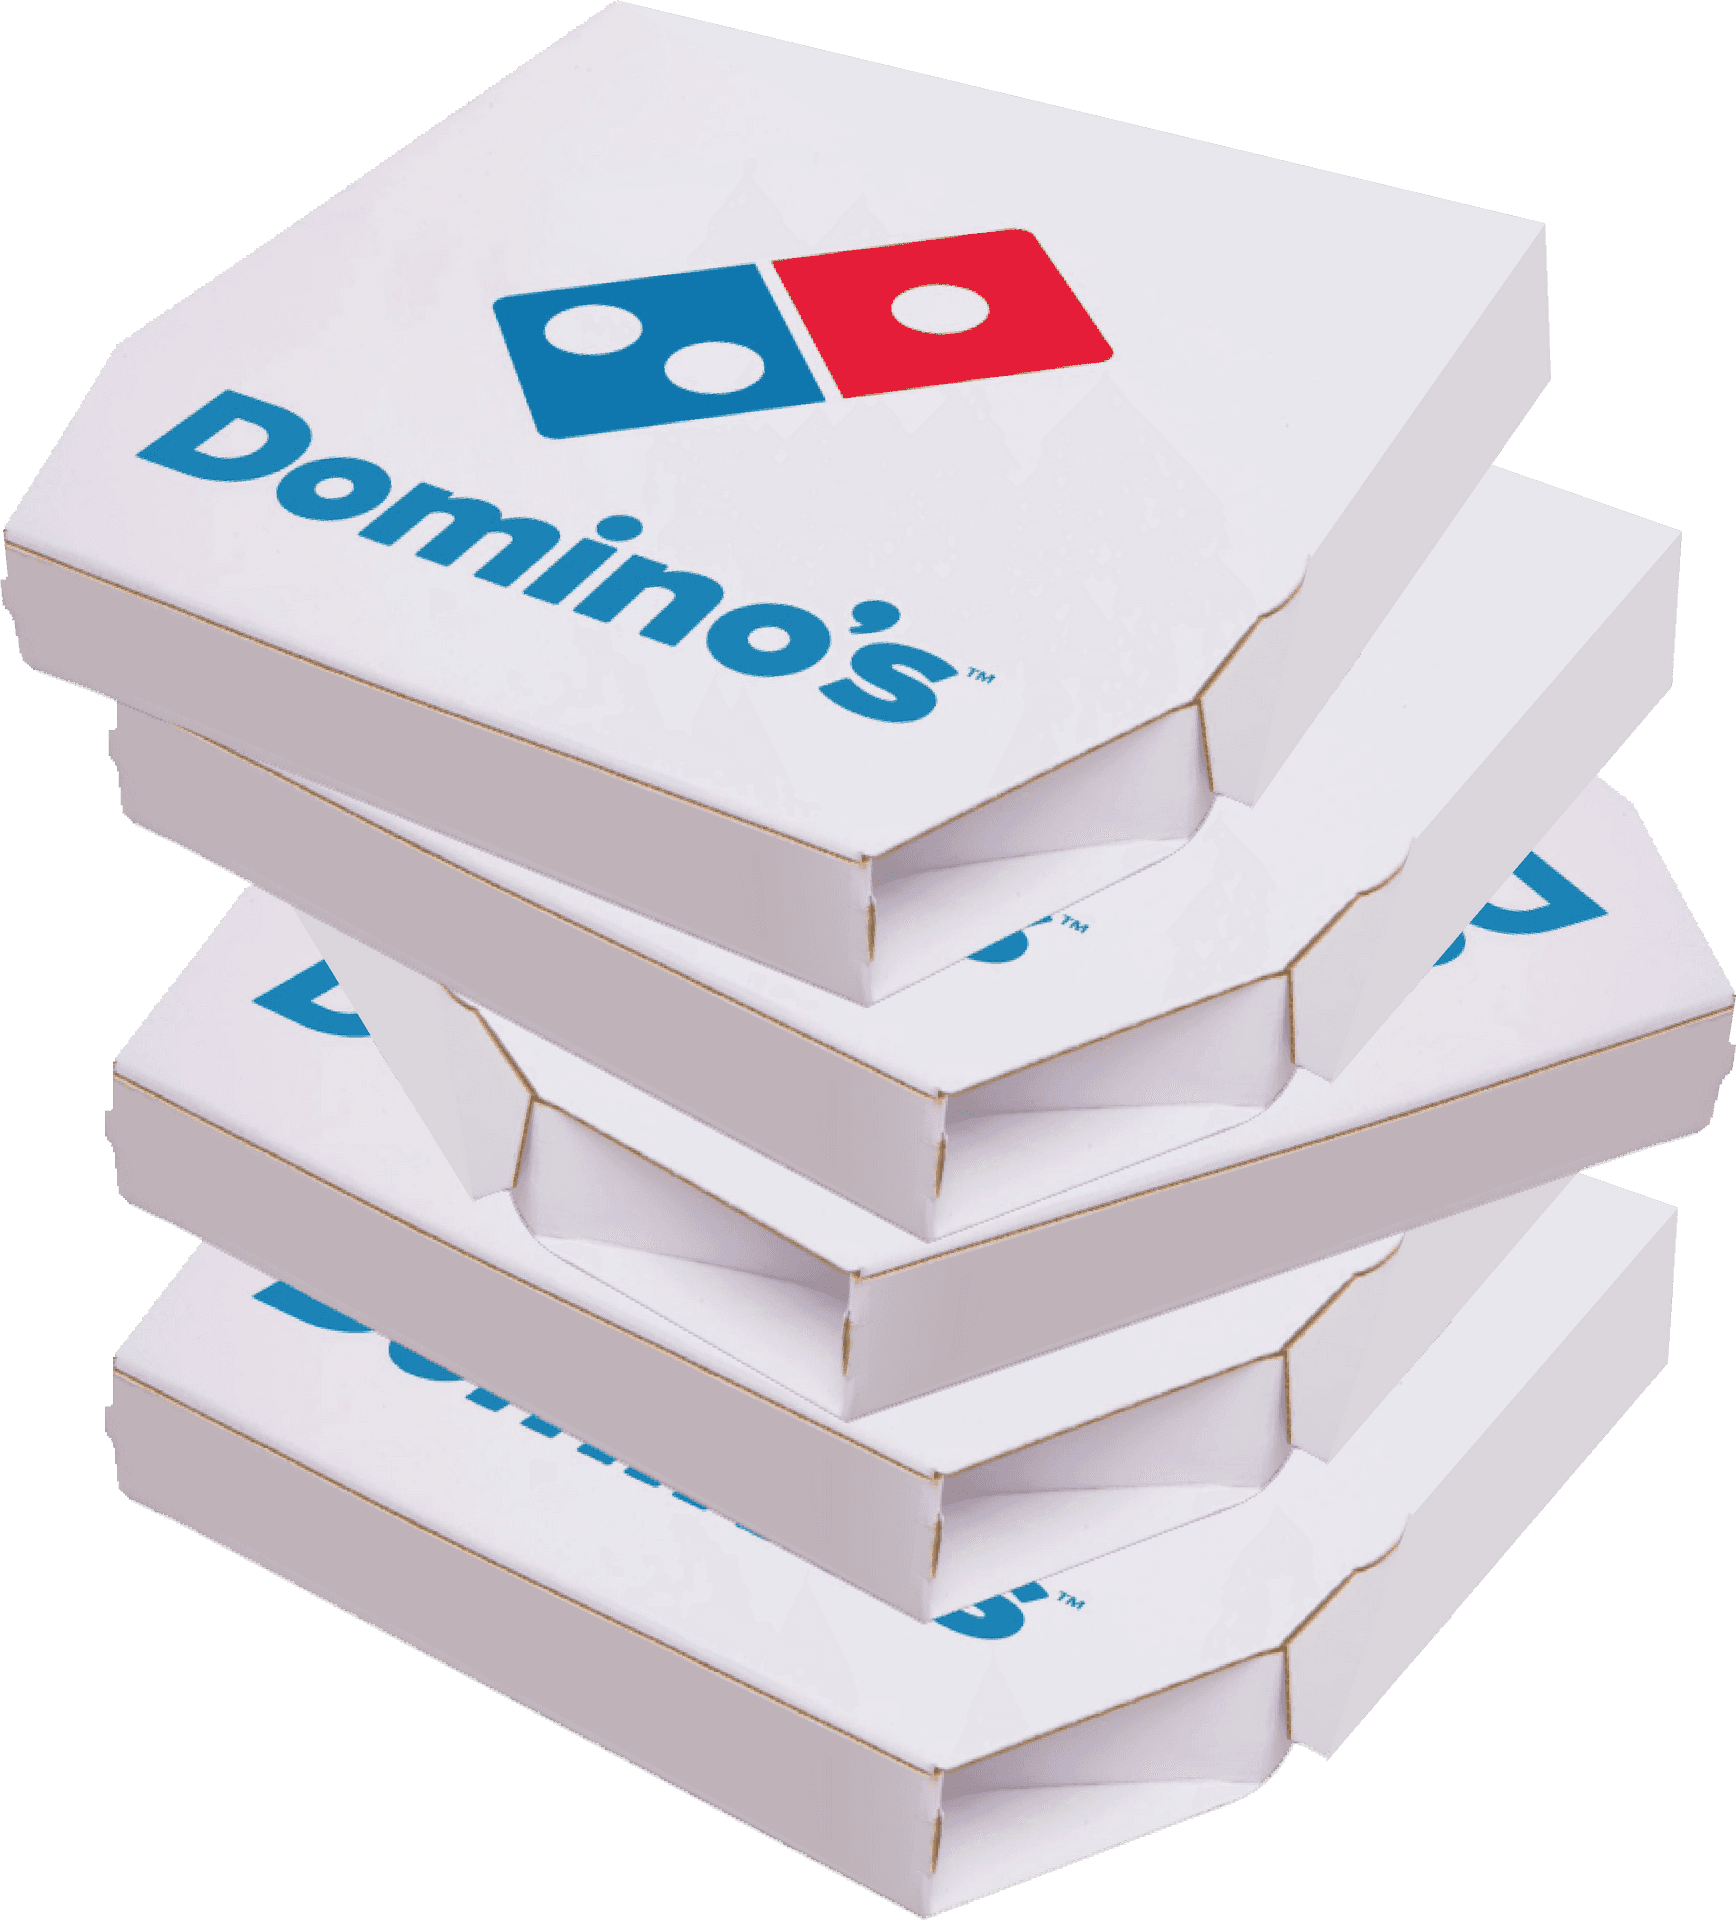 Stackof Dominos Pizza Boxes PNG